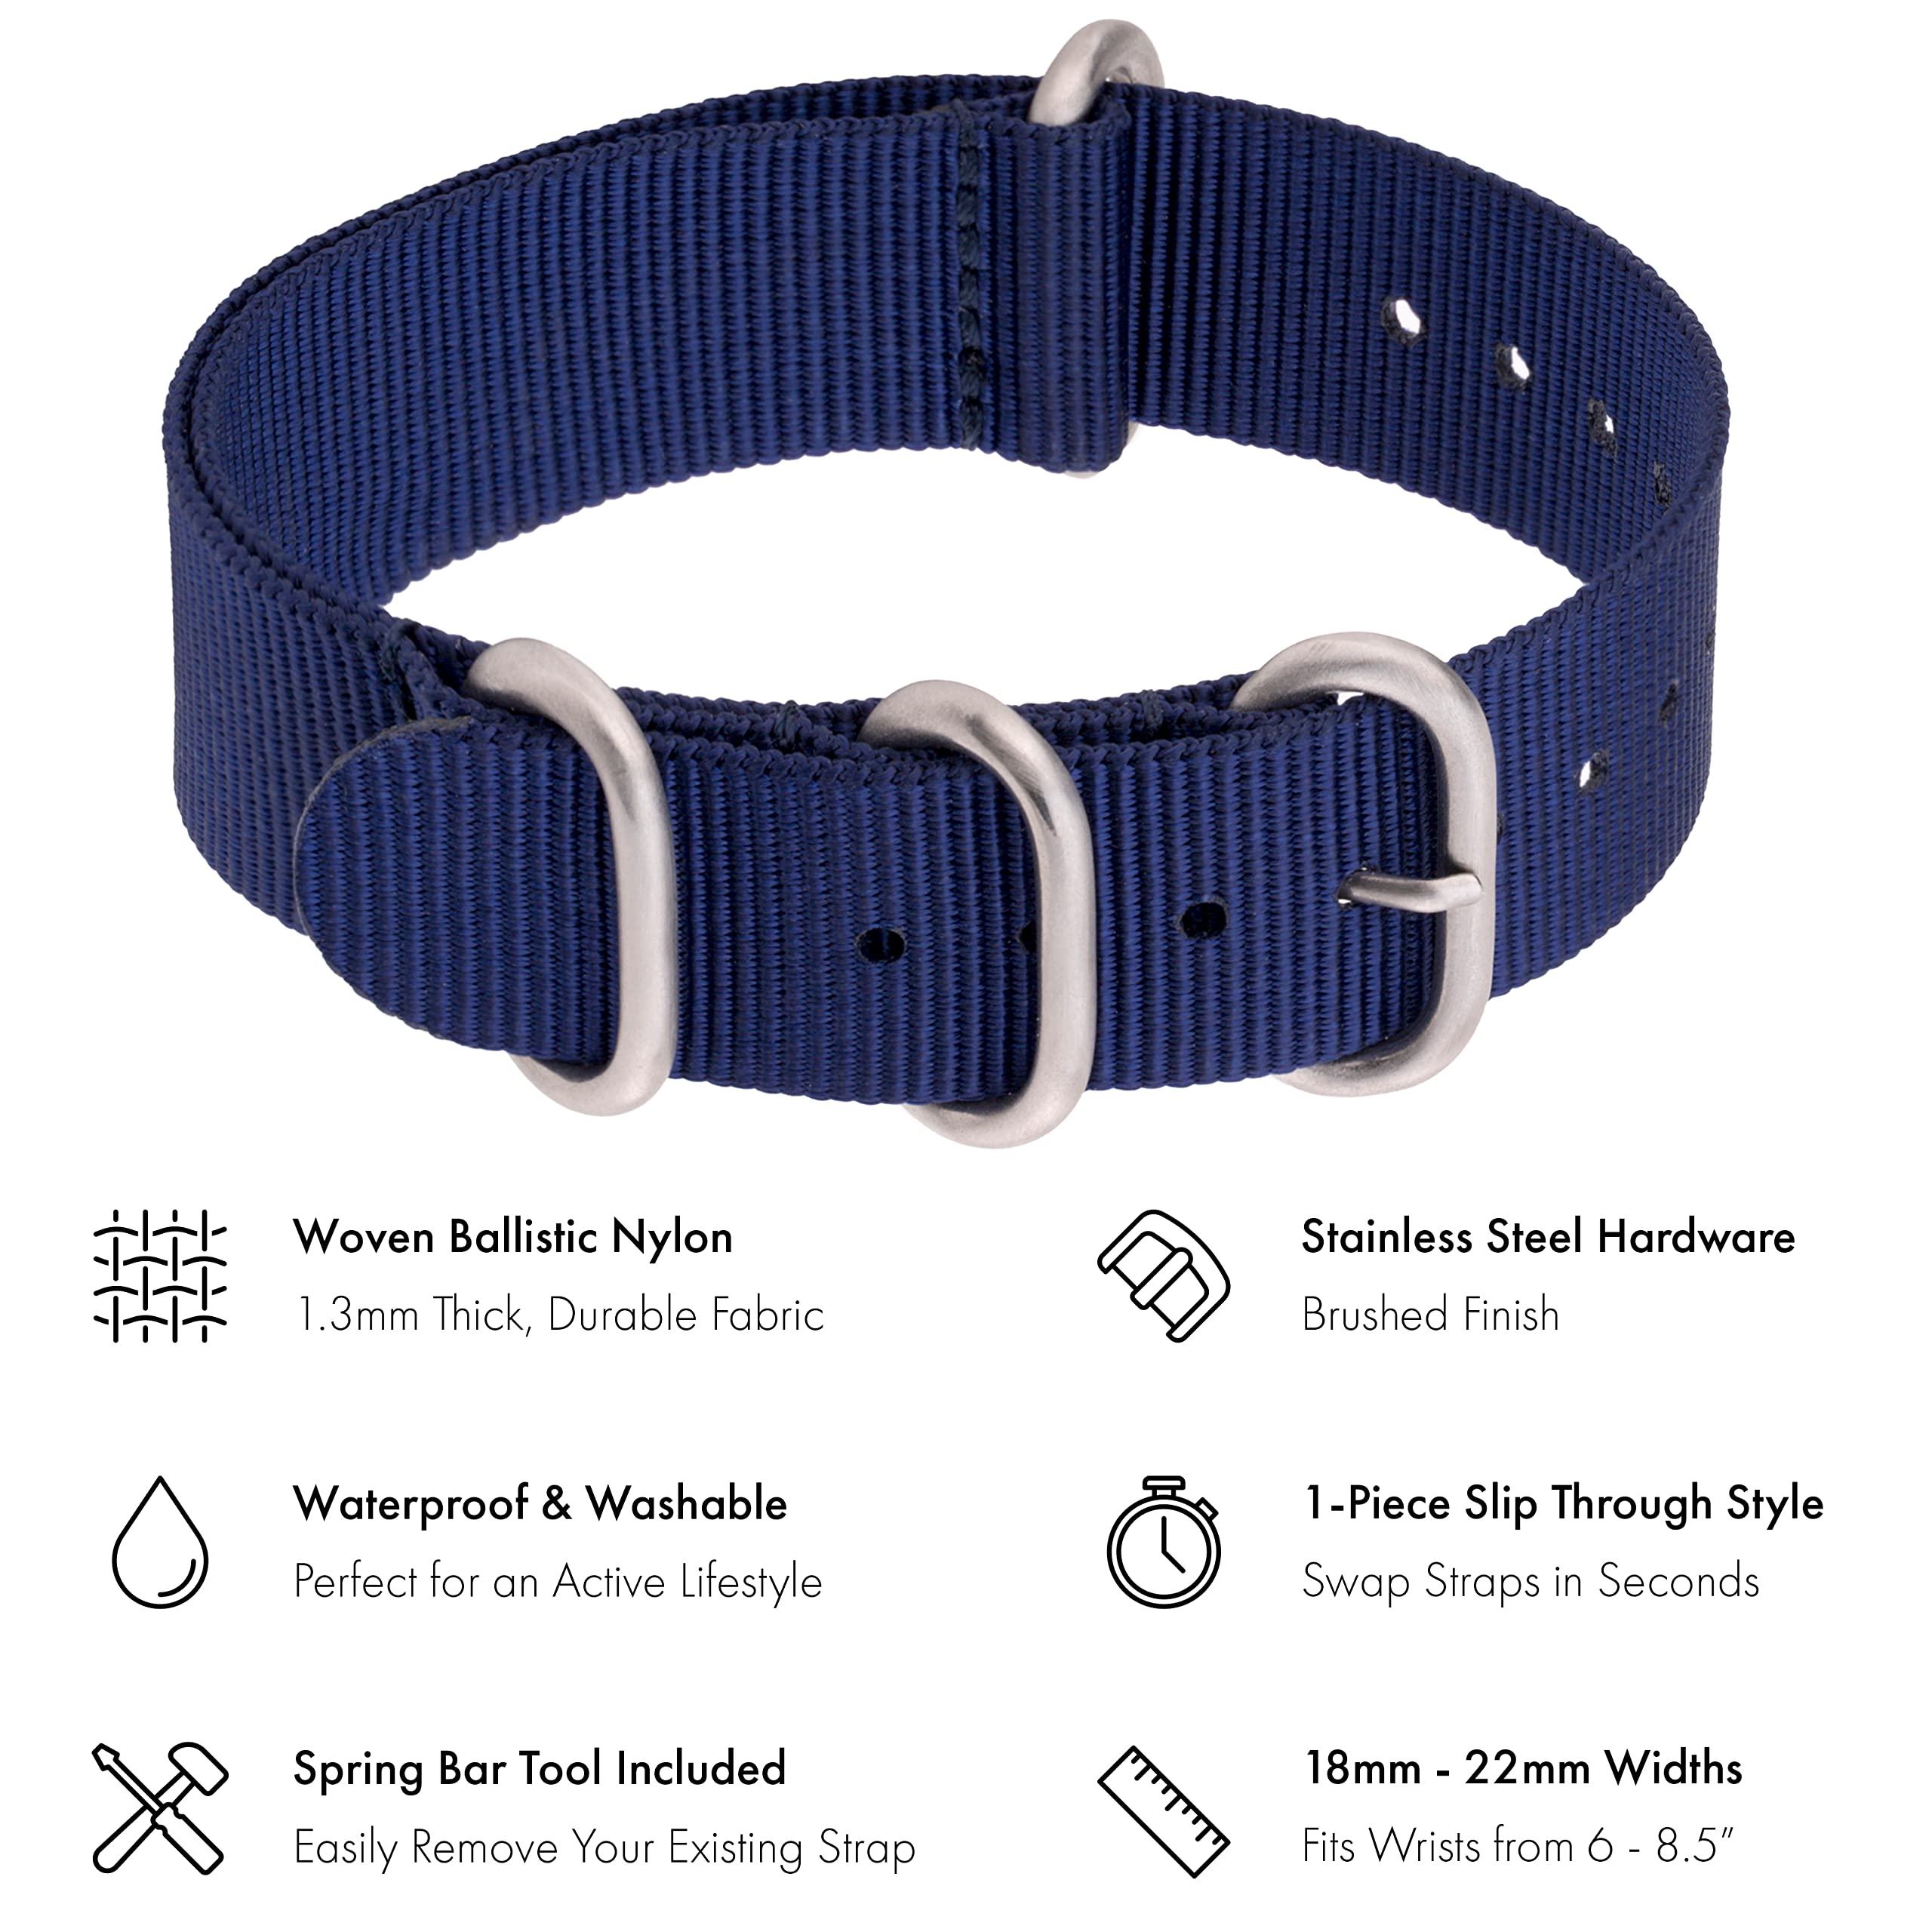 Benchmark Nylon Watch Band - One Piece Waterproof Ballistic Nylon - Slip Through Military Style Zulu Watch Strap for Men & Women - Choice of Color & Width - 18mm, 20mm or 22mm